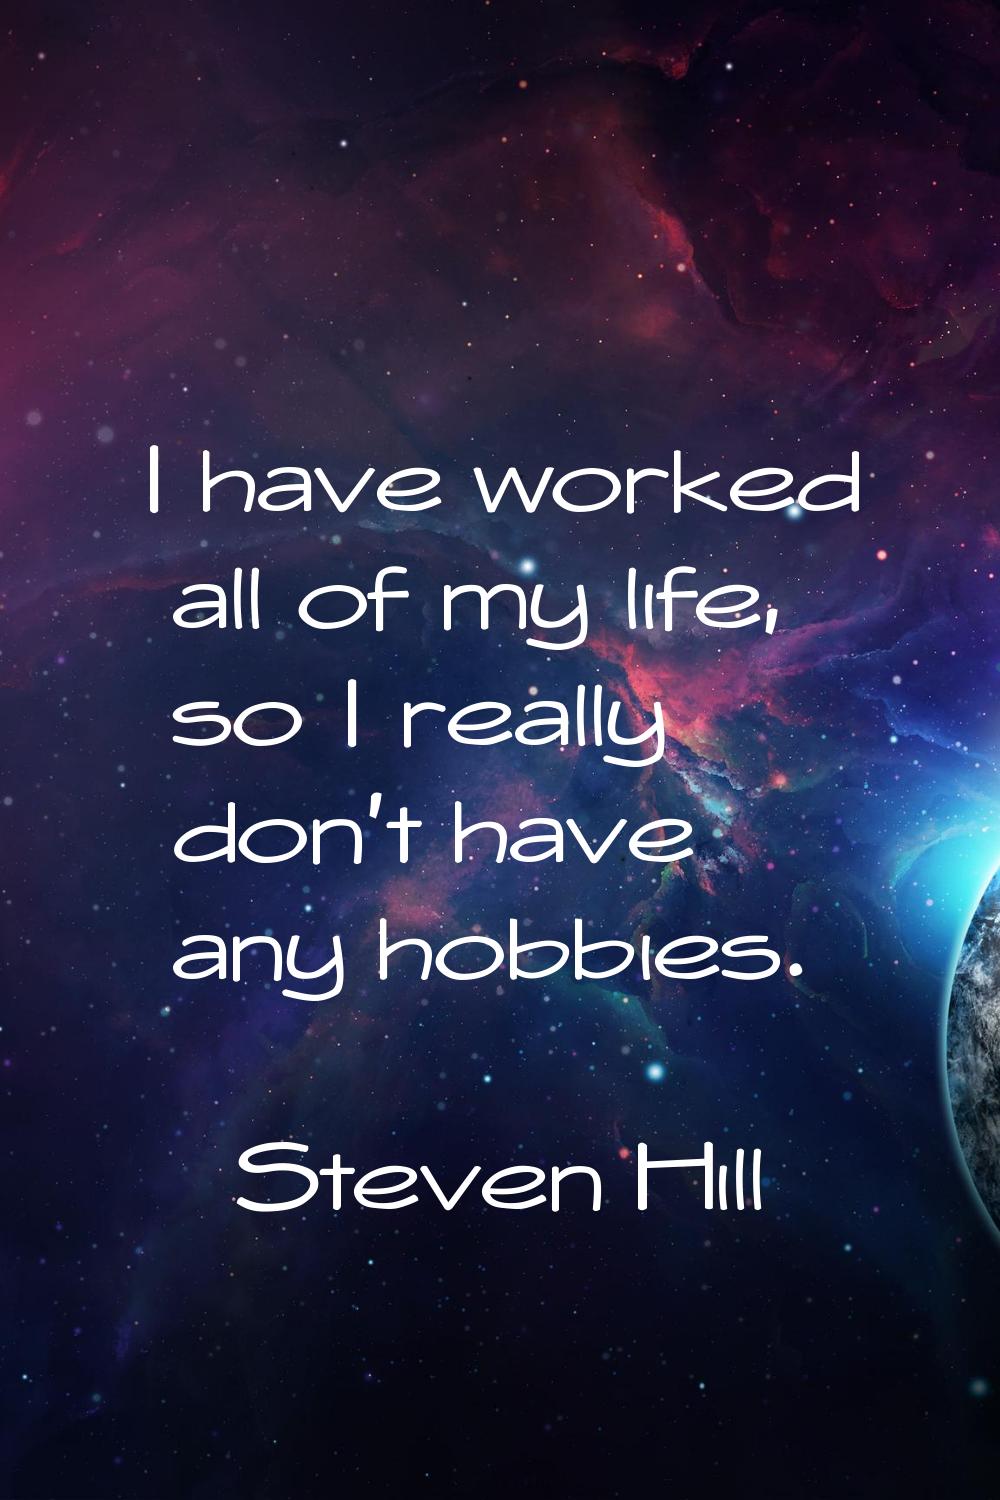 I have worked all of my life, so I really don't have any hobbies.